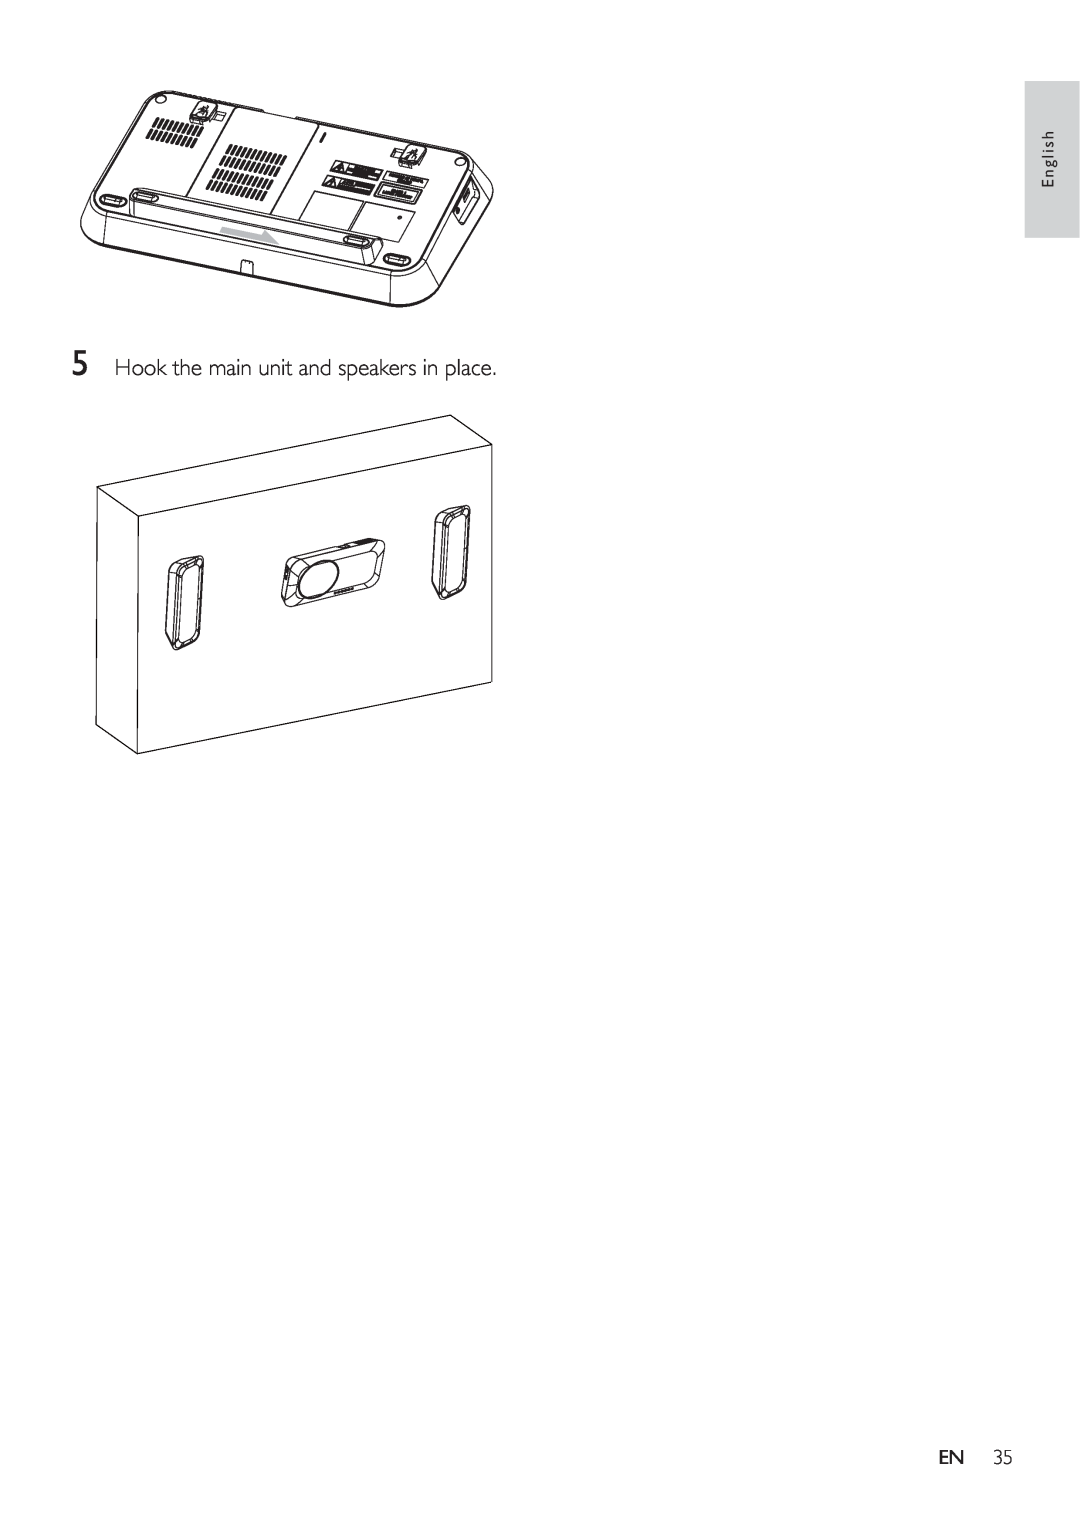 Philips HES4900/98 user manual 5Hook the main unit and speakers in place, English 